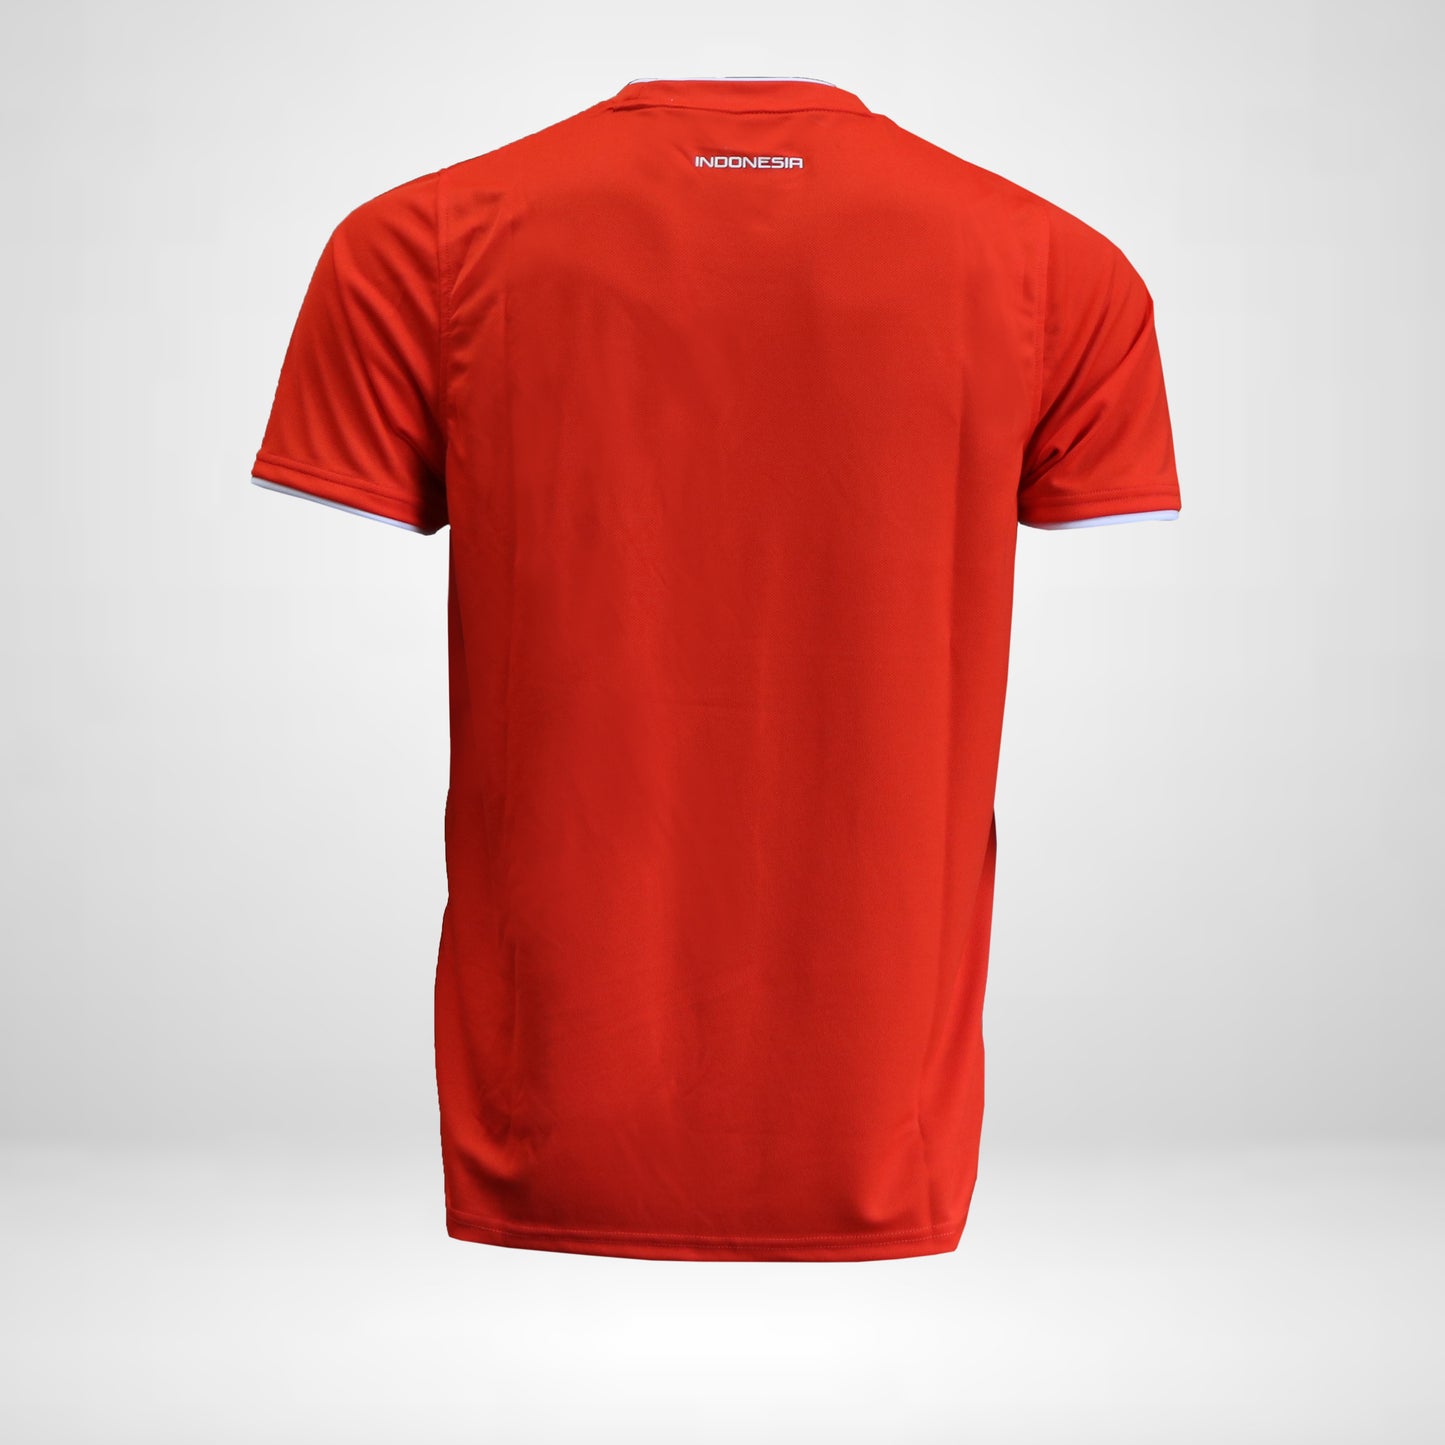 Concave Indonesia Fantasy Jersey - Red